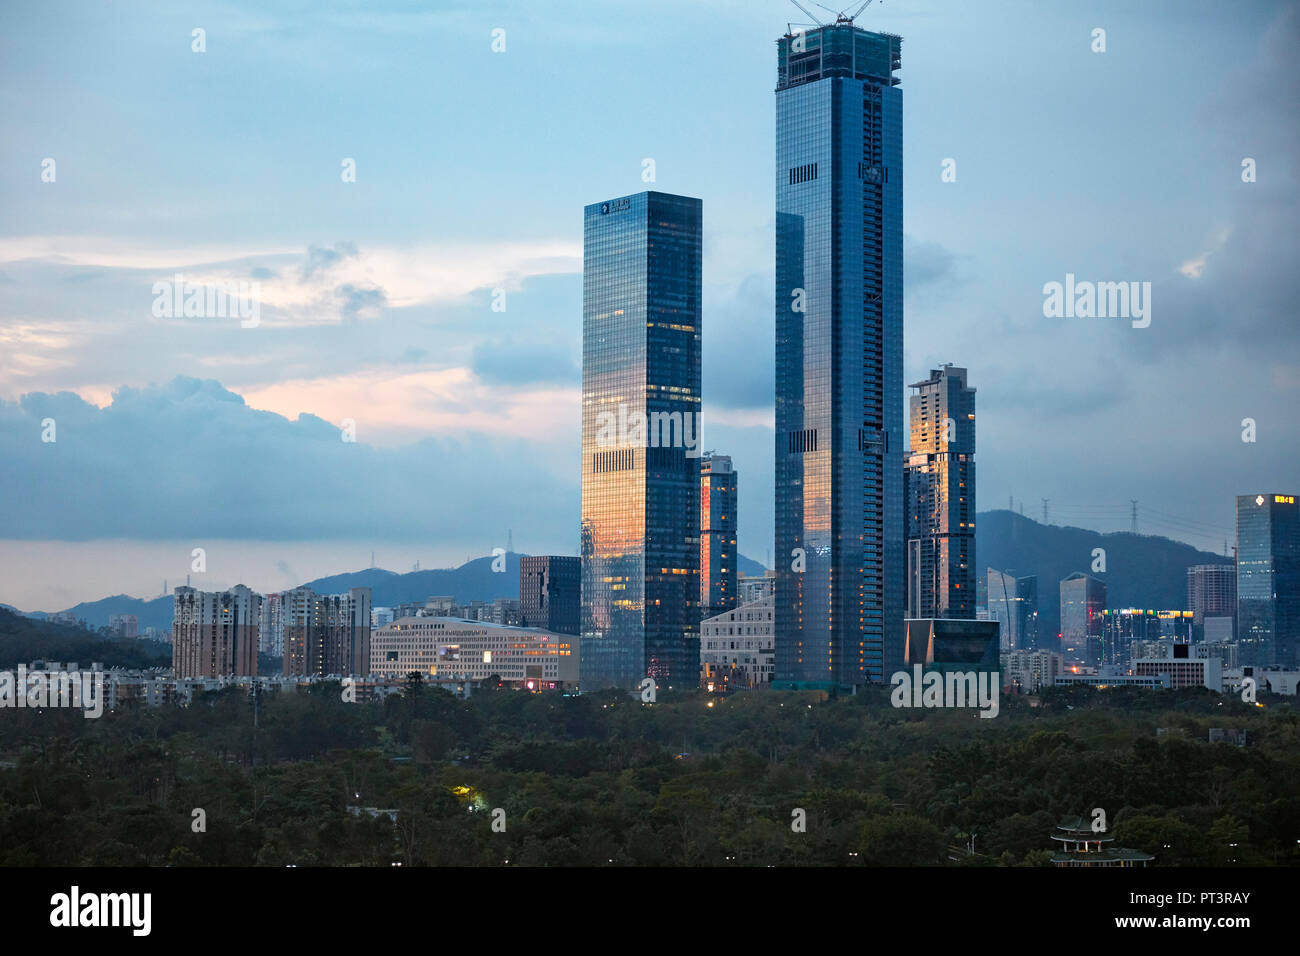 High-rise buildings in Futian District at dusk. Shenzhen, Guangdong Province, China. Stock Photo